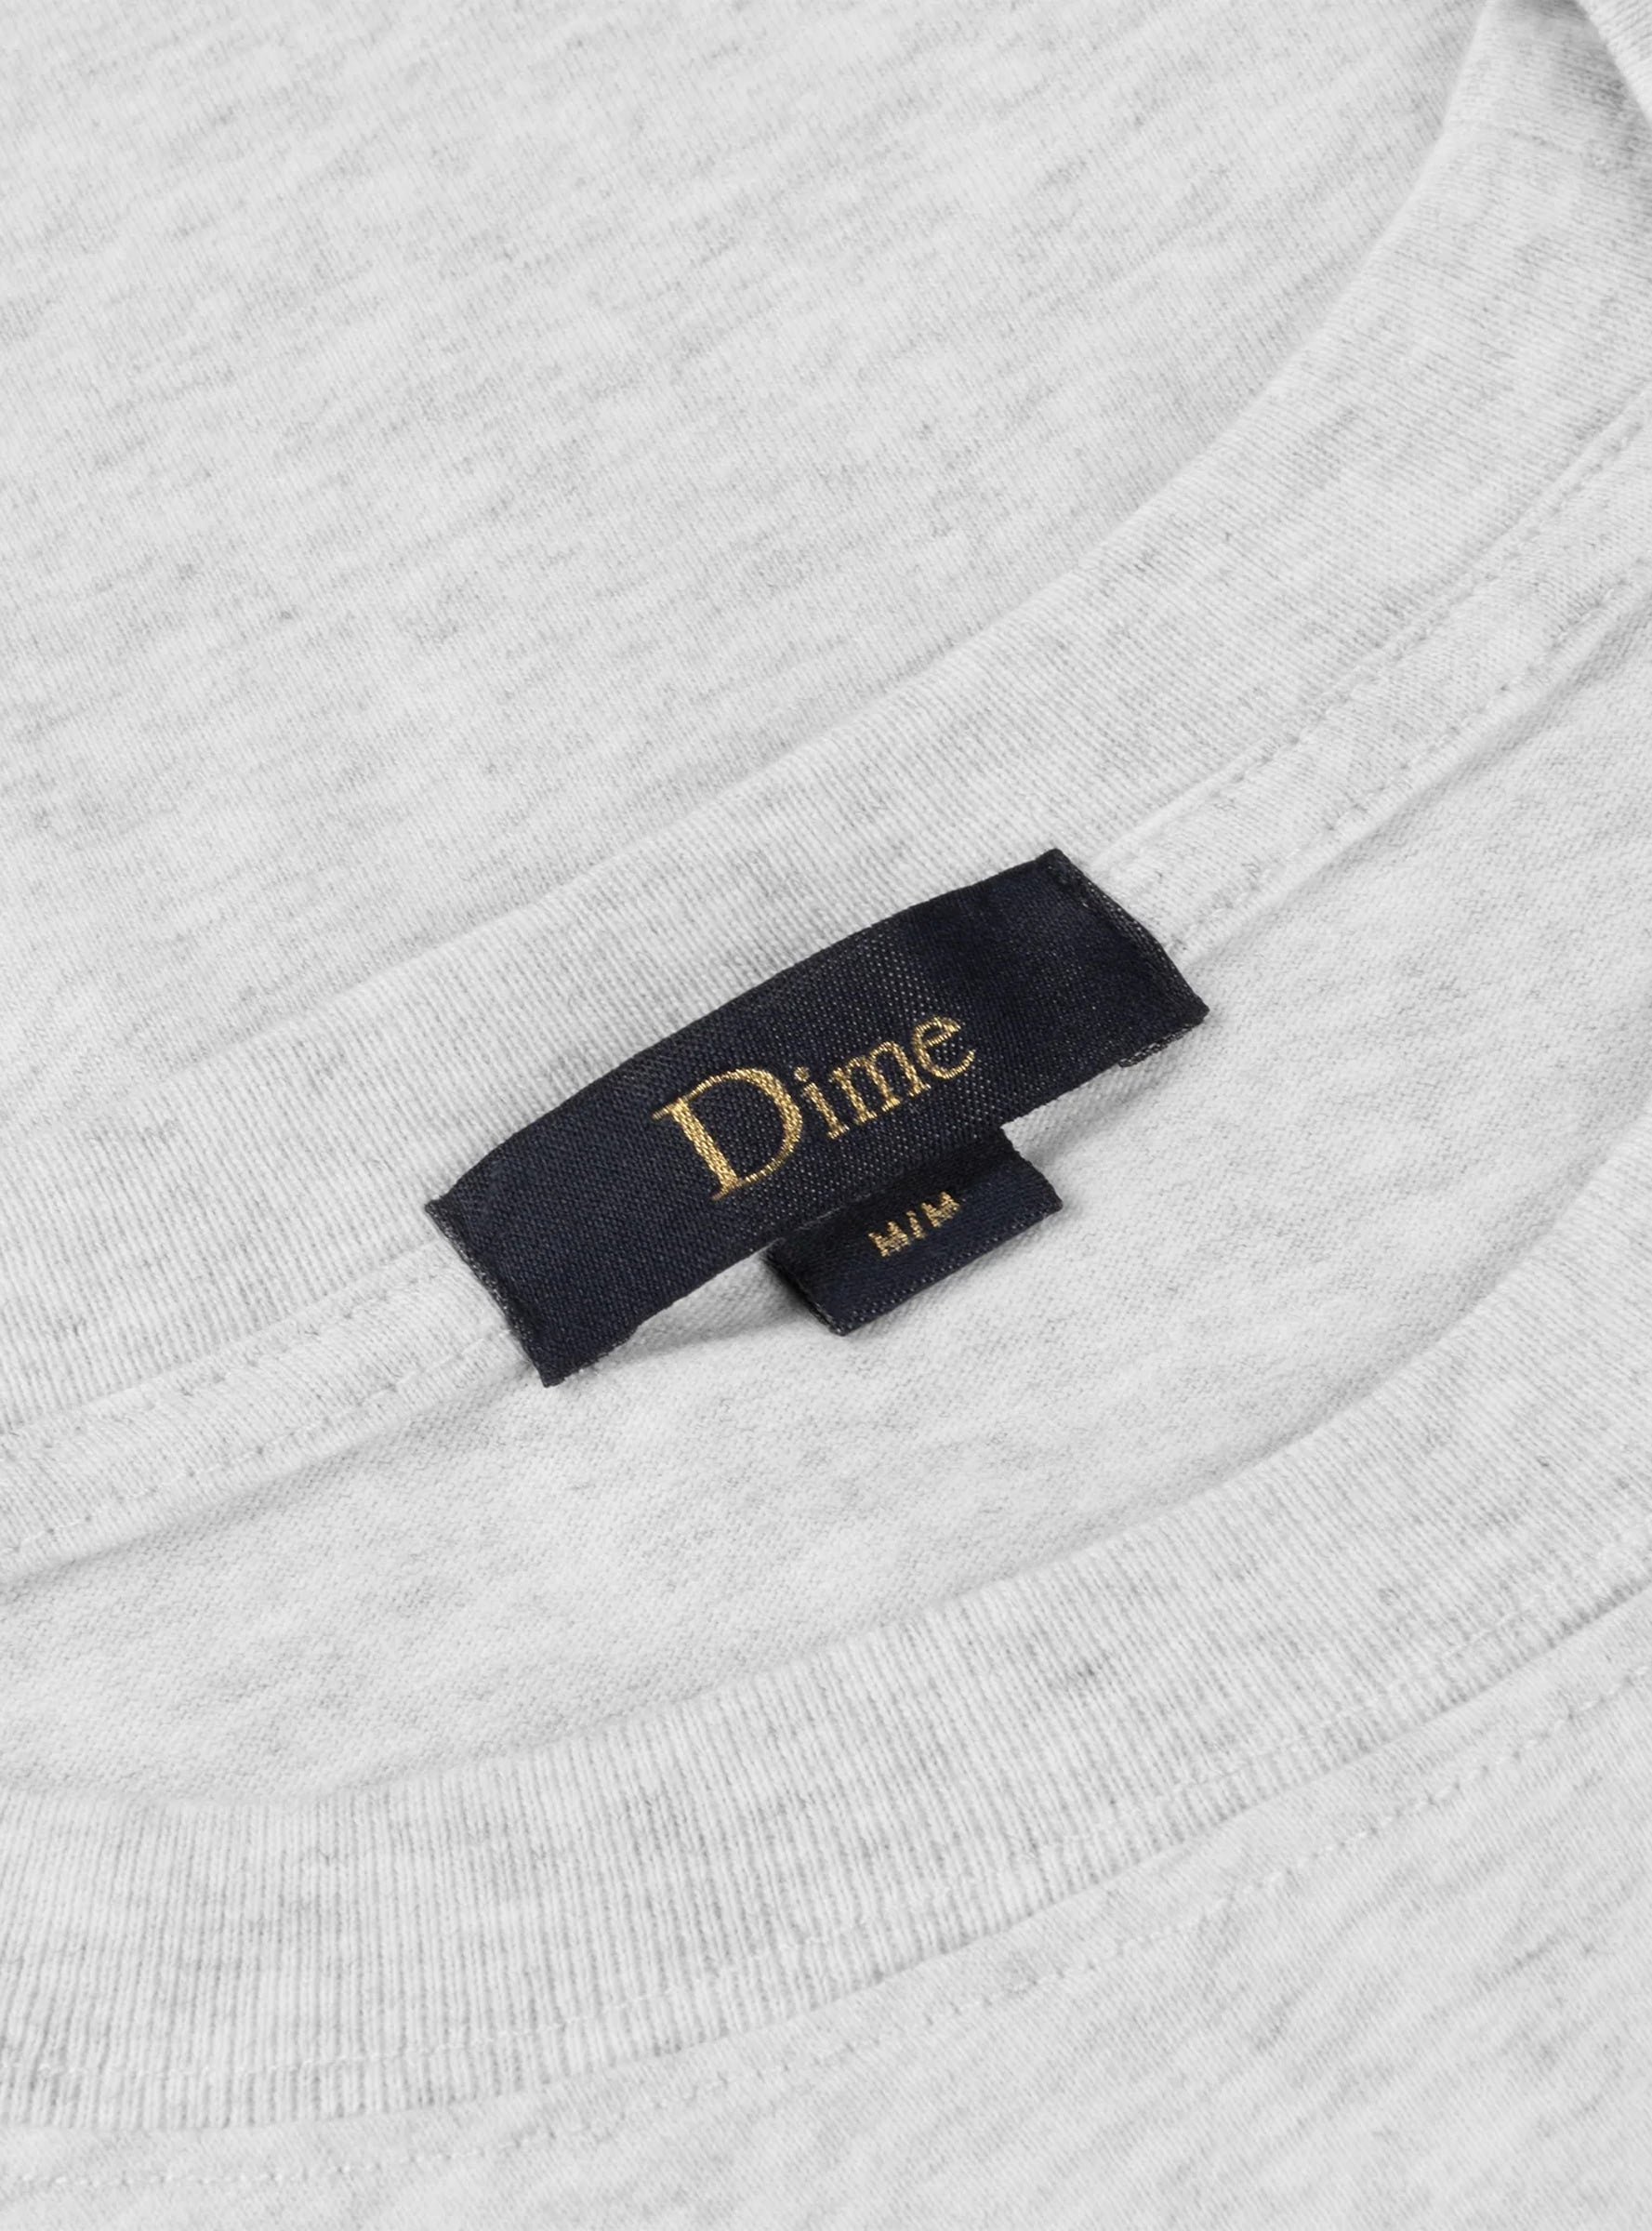  Dime Exe T-shirt Ash - Size: Small